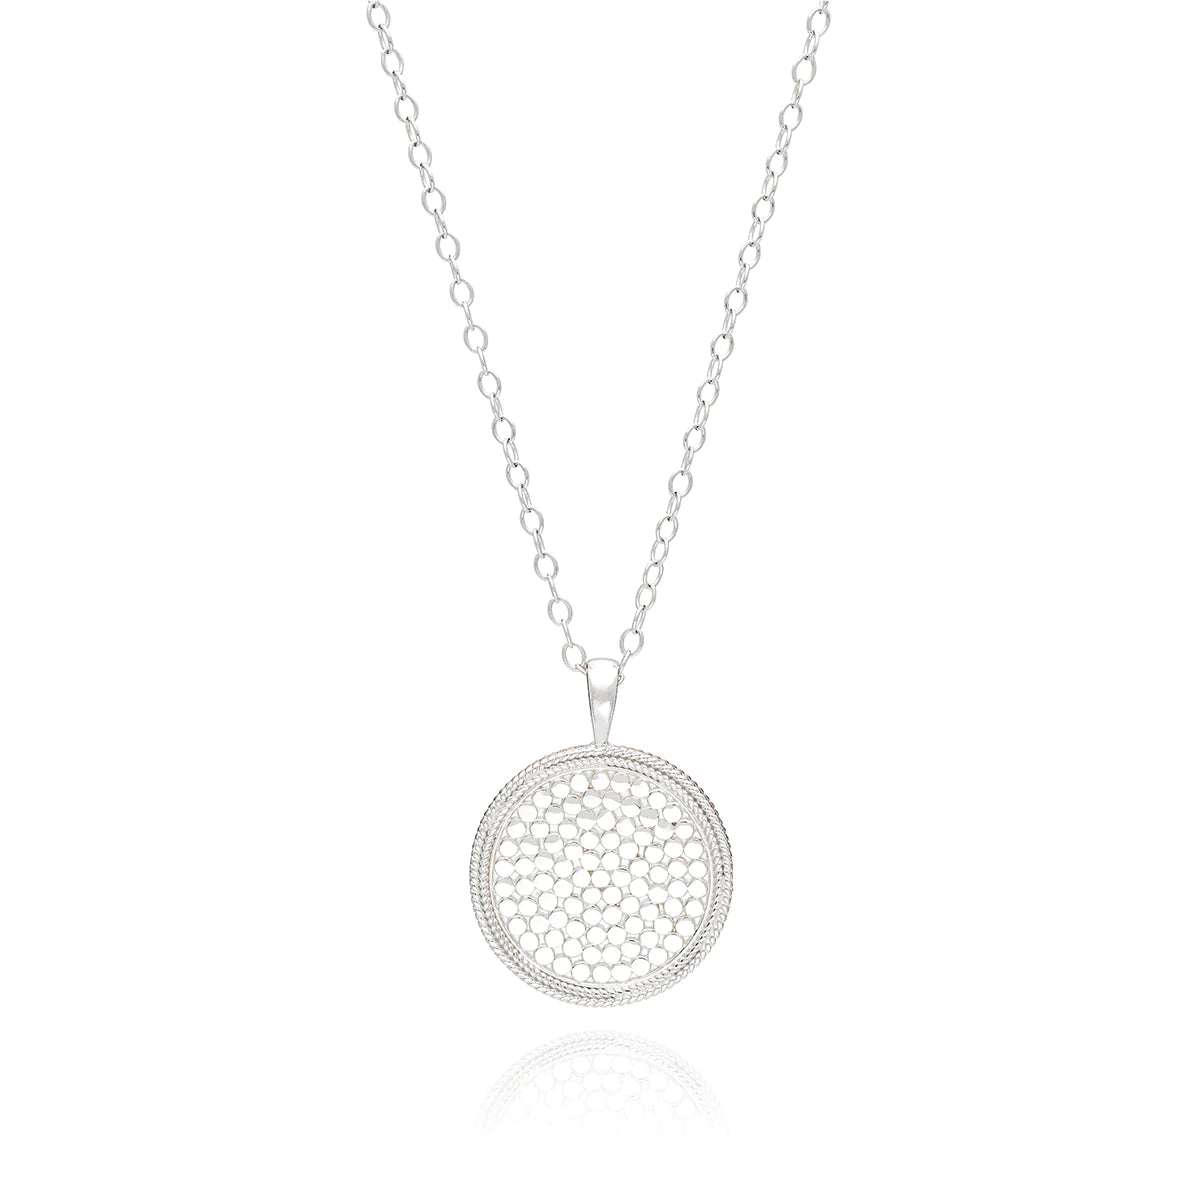 long silver chain necklace with a large sterling silver medallion pendant